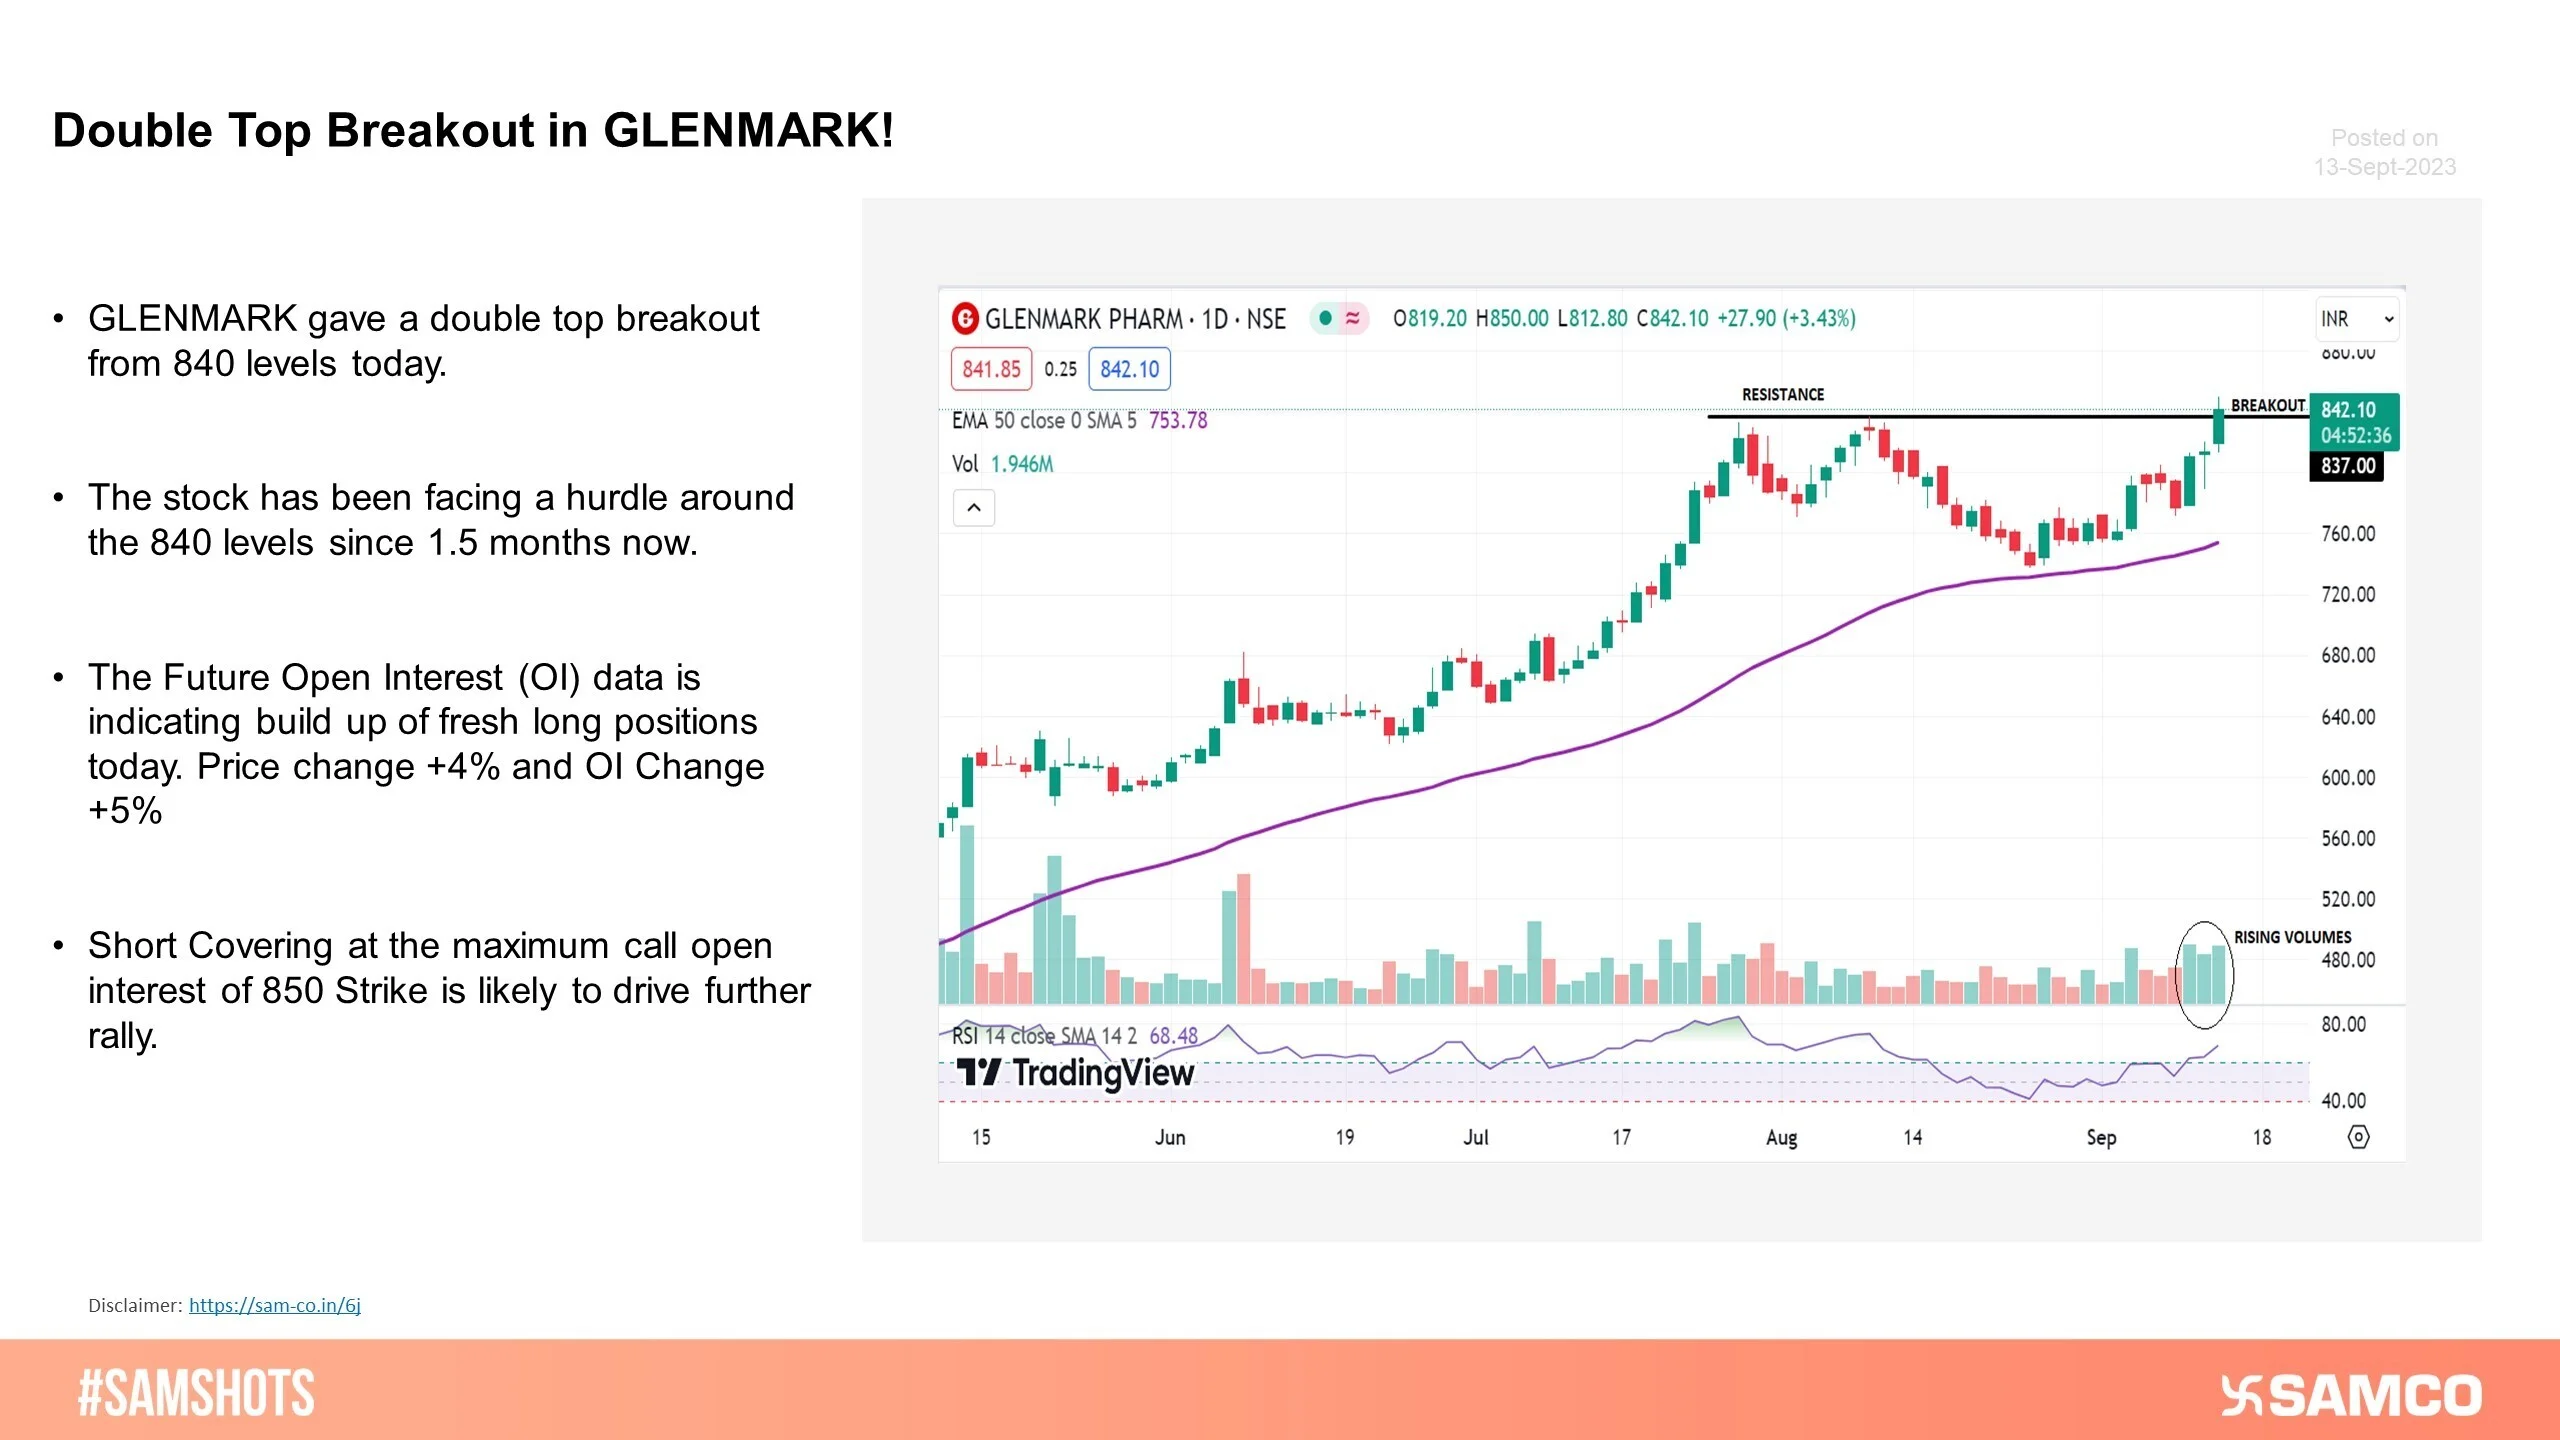 GLENMARK has broken out of its previous resistance with rise in volumes and Long Buildup in Future Open Interest (OI) data